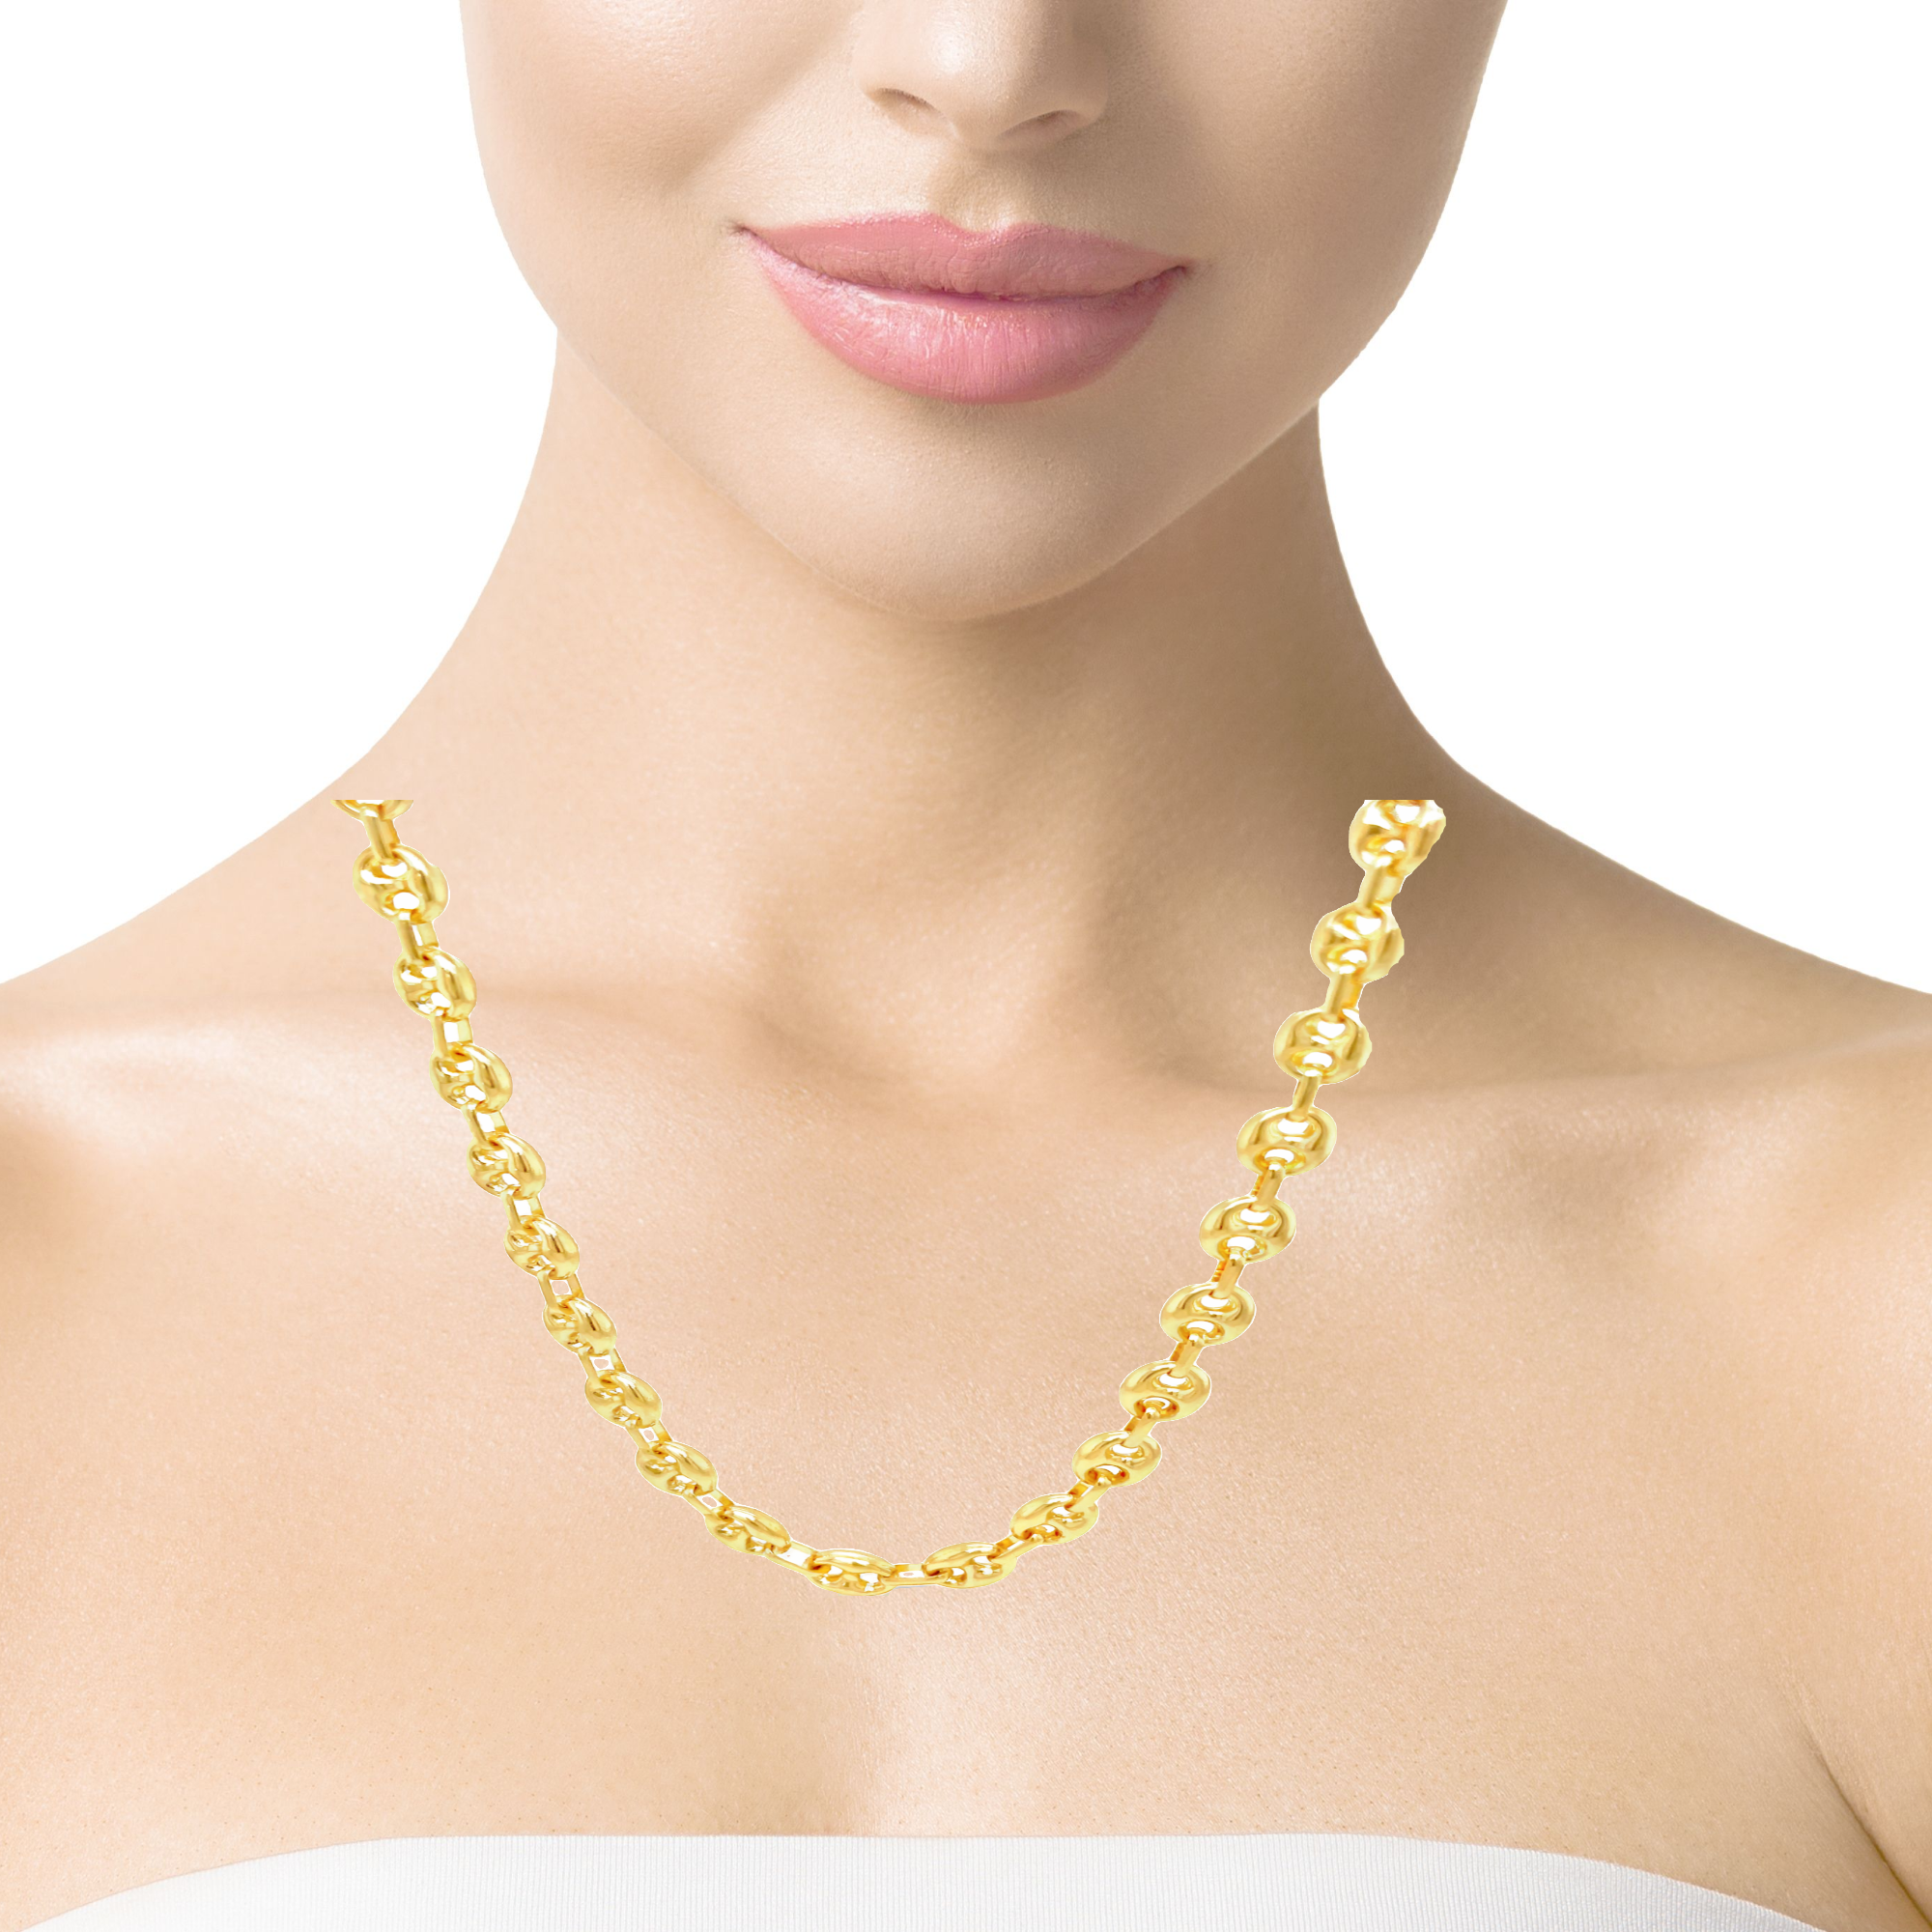 This classic 14K yellow gold mariner link necklace measures 20" in length and 6.30 mm in thickness. It also features a lobster catch for secure fastening. It ensures a timeless and long-lasting look.